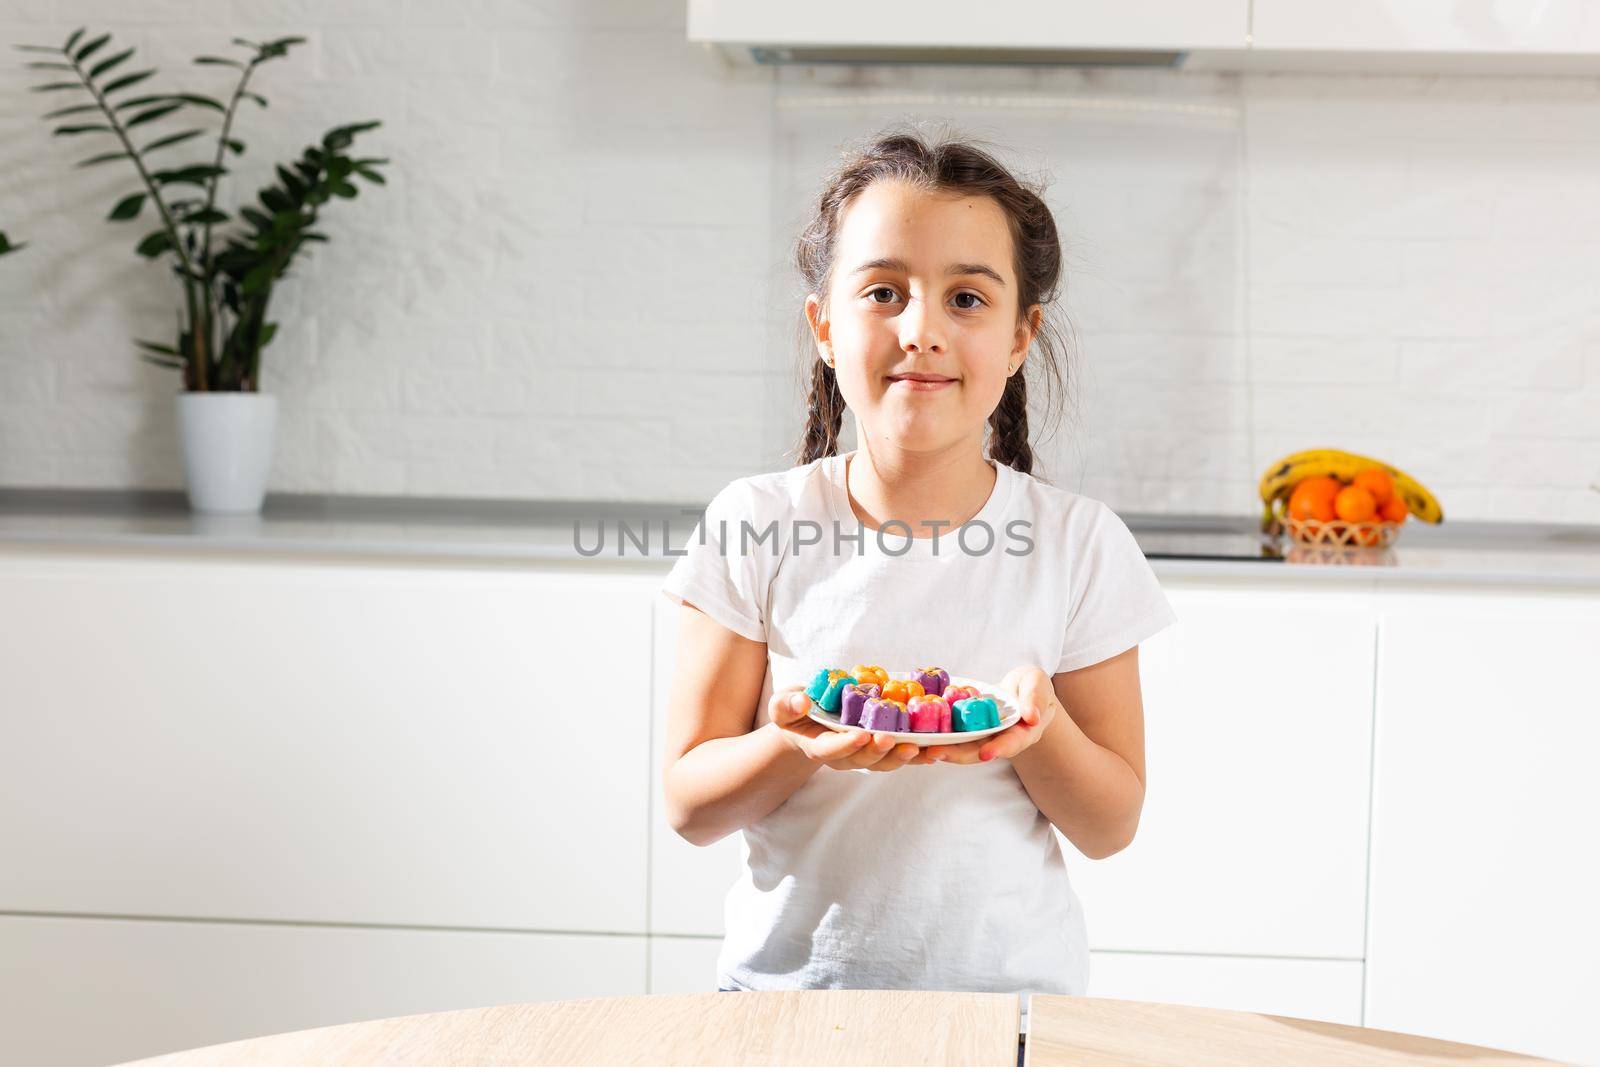 Small girl celebrating Holi Festival of Colors holding tray in hand.